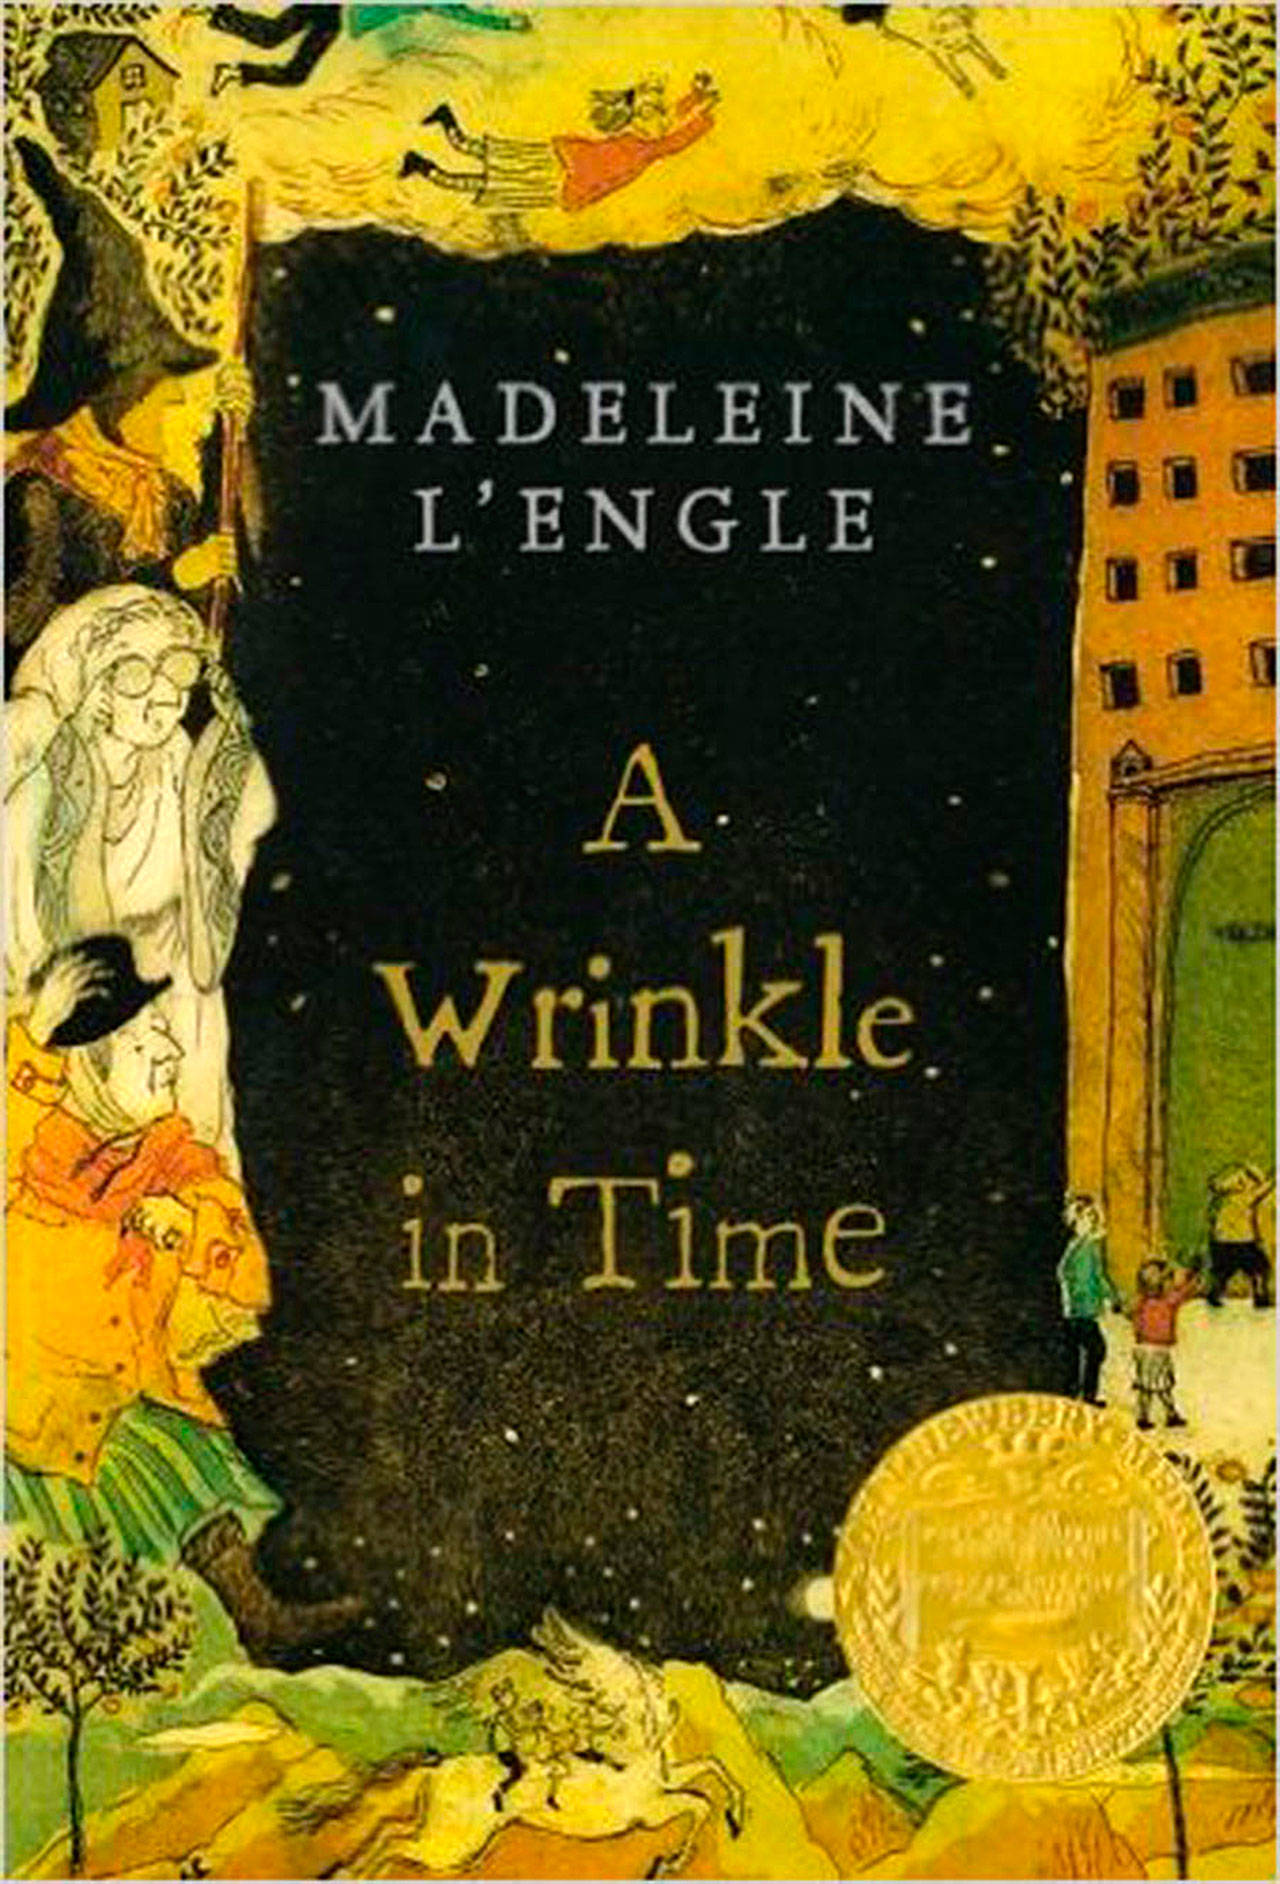 The beloved children’s book “A Wrinkle in Time” is now a movie. It hits theaters March 9. (Square Fish)